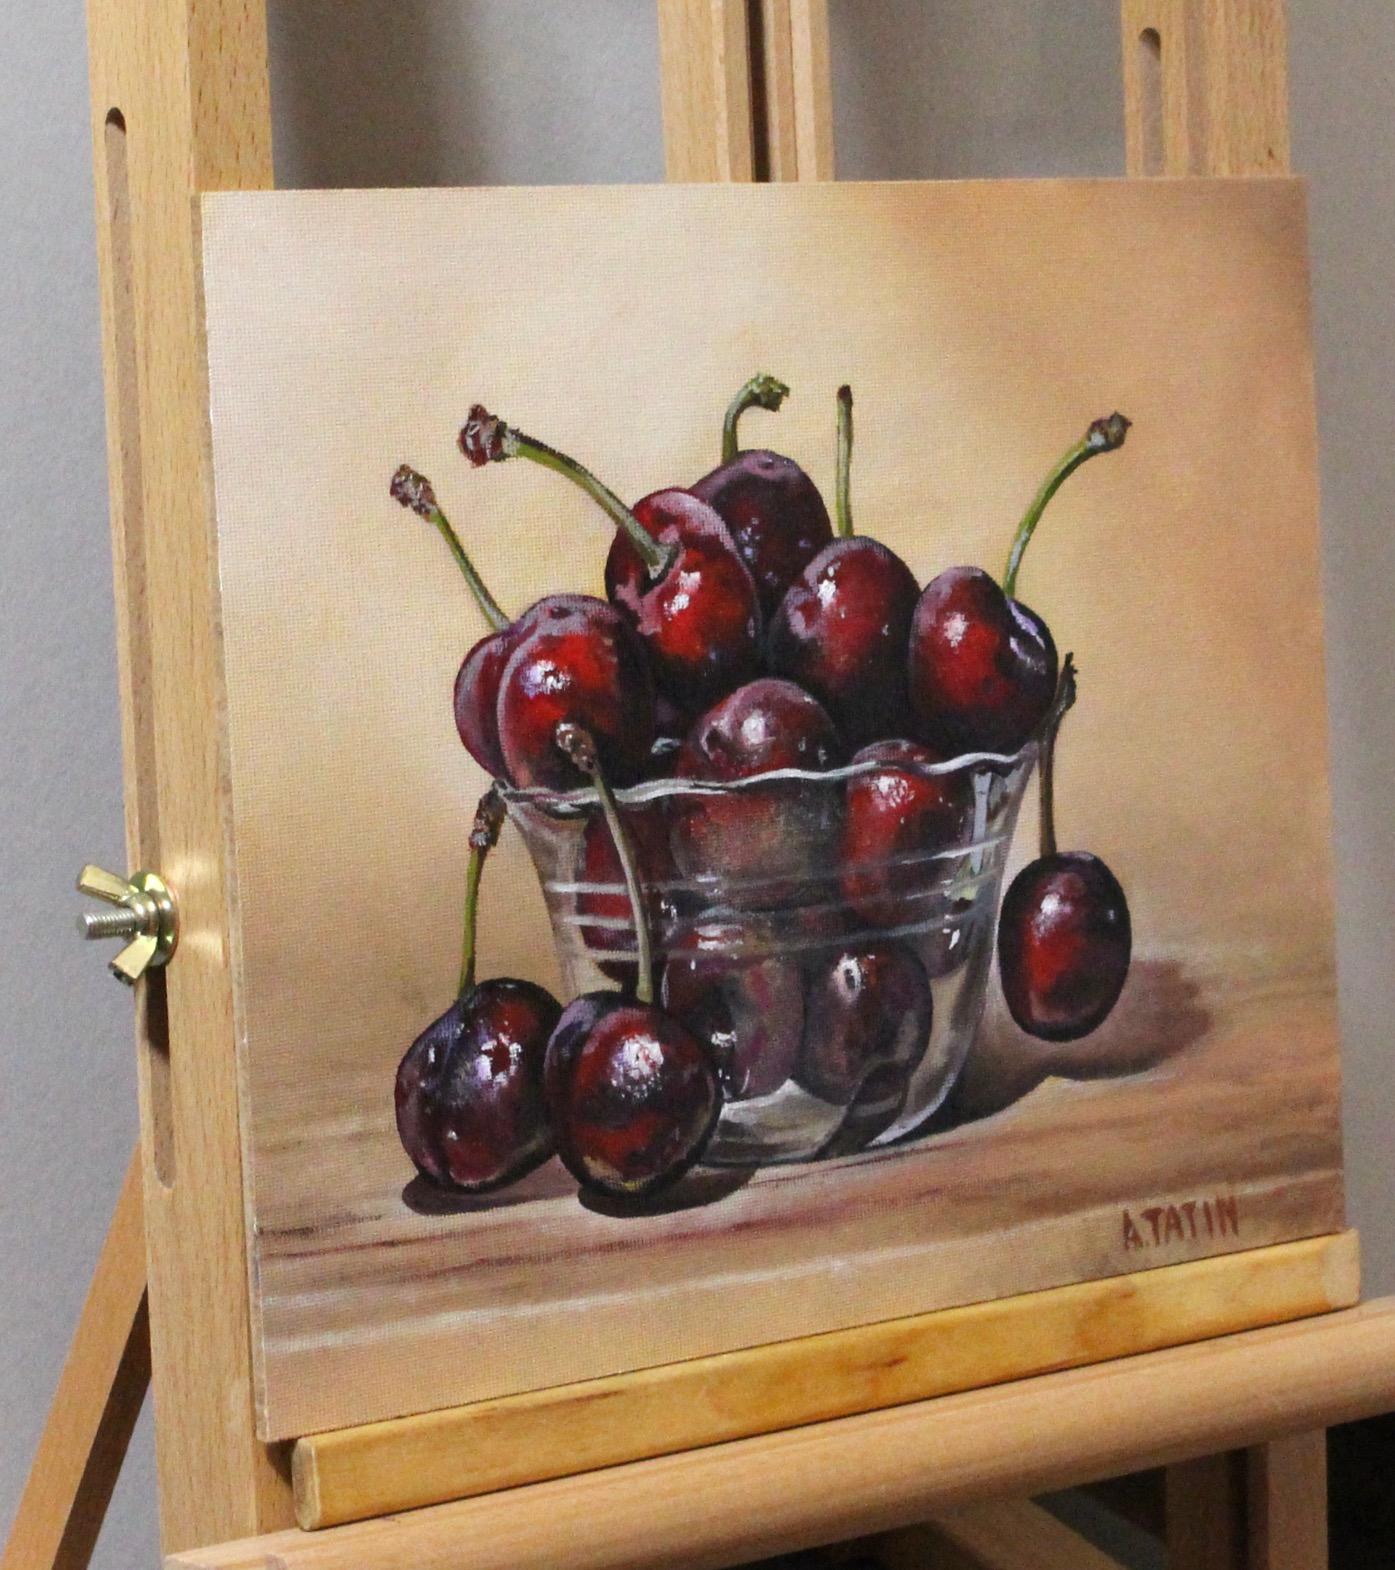 Red Cherries in a Glass Bowl, Oil Painting - Contemporary Art by Art Tatin